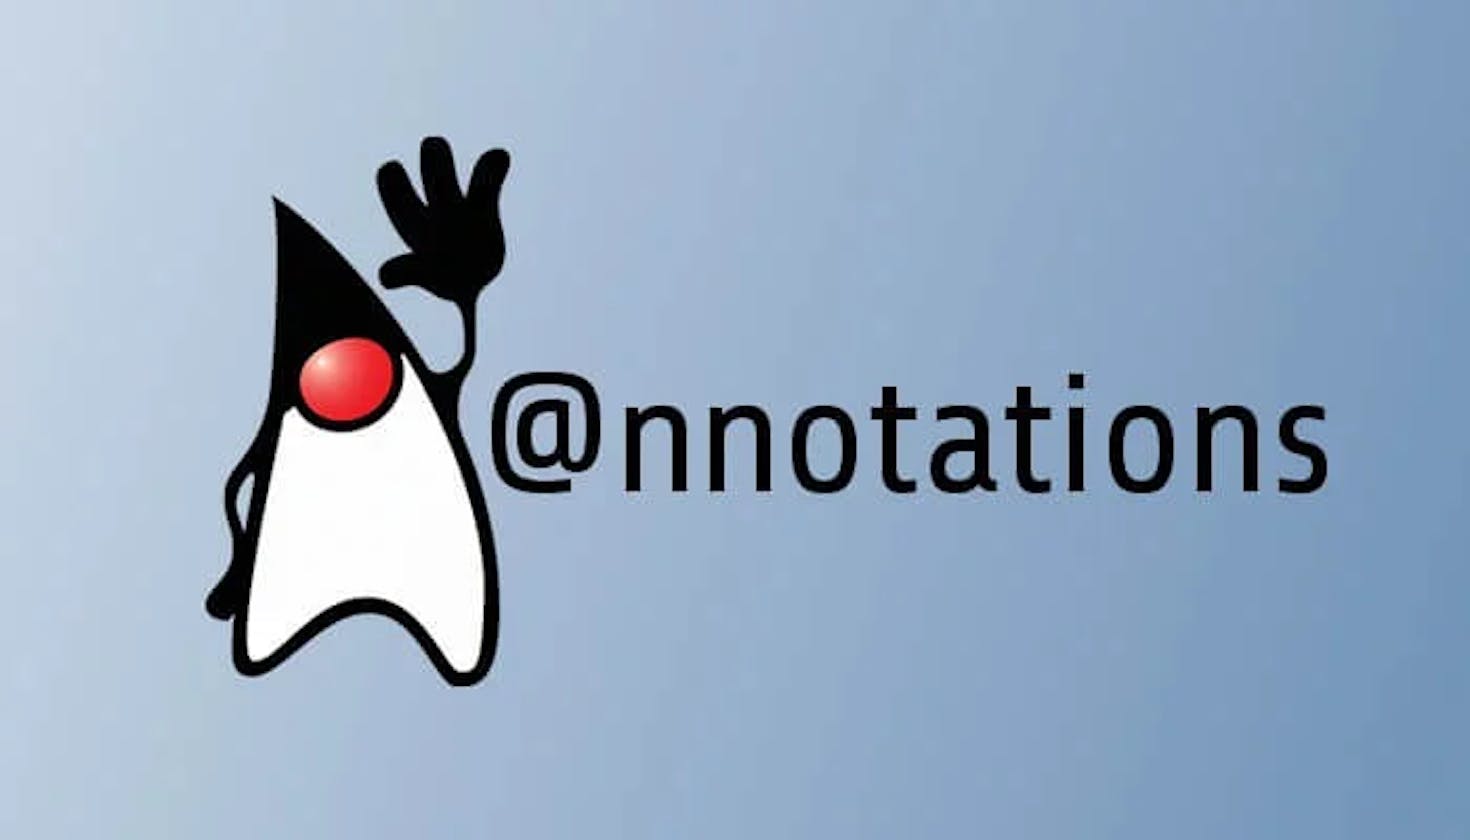 Annotations in Java, Spring, and Spring Boot